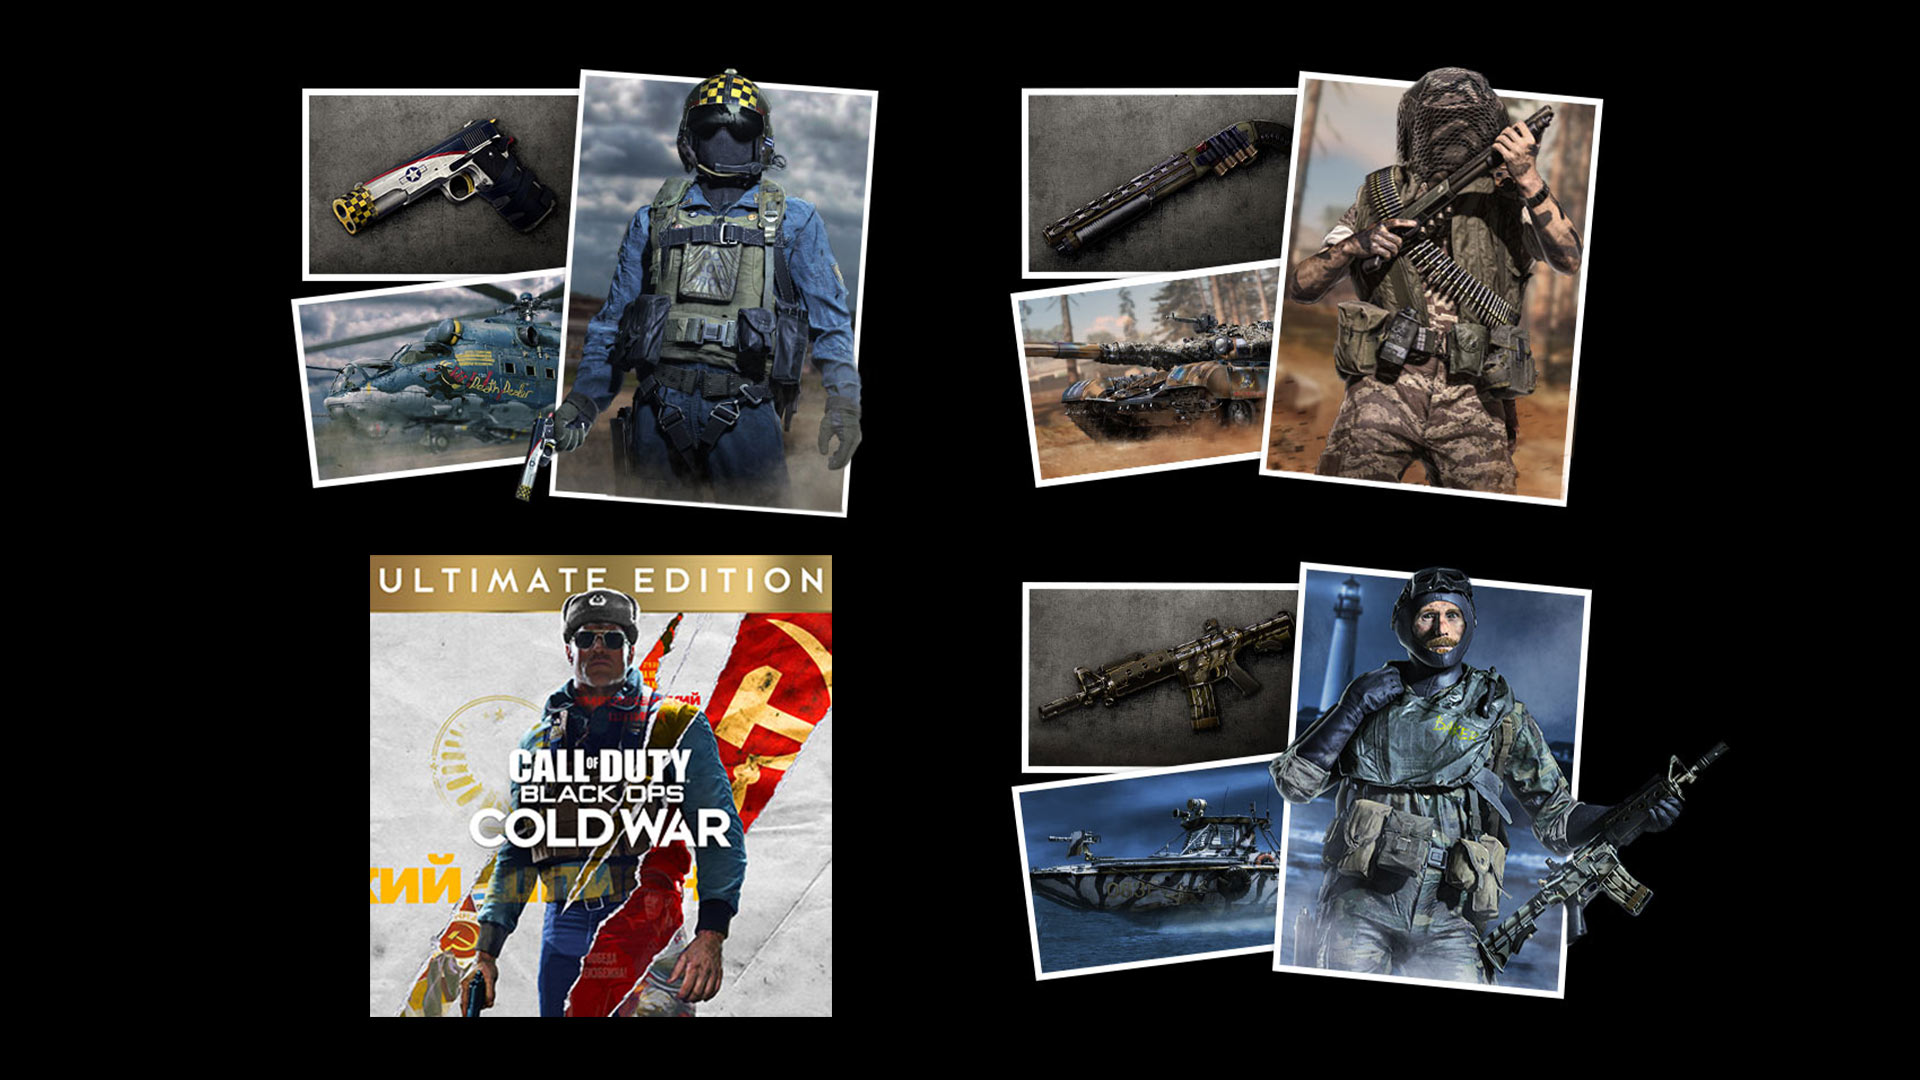 call of duty cold war - ultimate edition